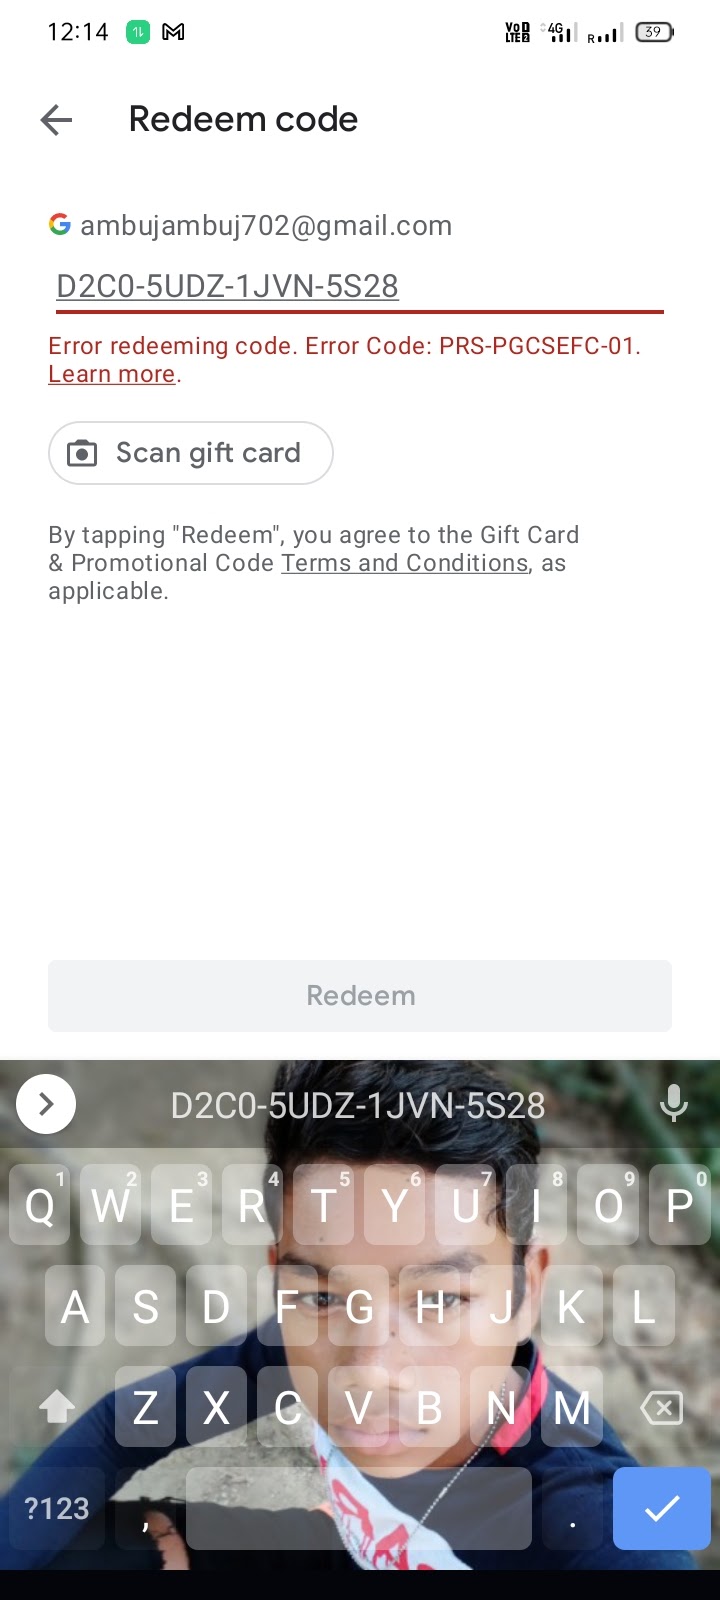 we need more info your gift card redeem code - Google Play Community